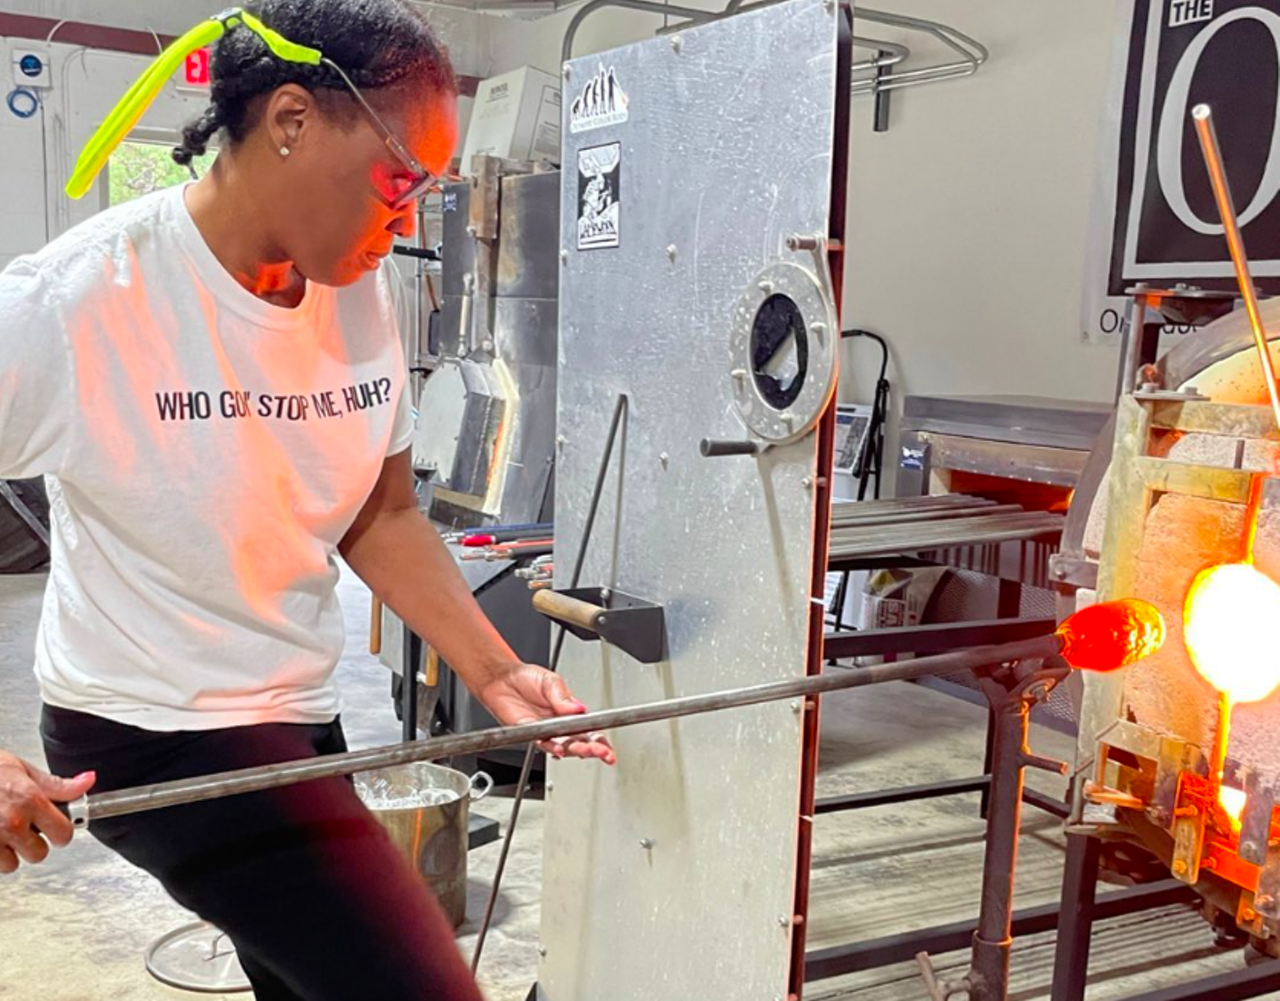 Take a glassblowing class
130 Bomar Court, Longwood
Take a day to yourself to learn a new skill with a glassblowing class with Orlando Glass Center. It’s a little more elevated than simply painting, plus there’s fire. Add a little suspense (safely) to your creative solo date.